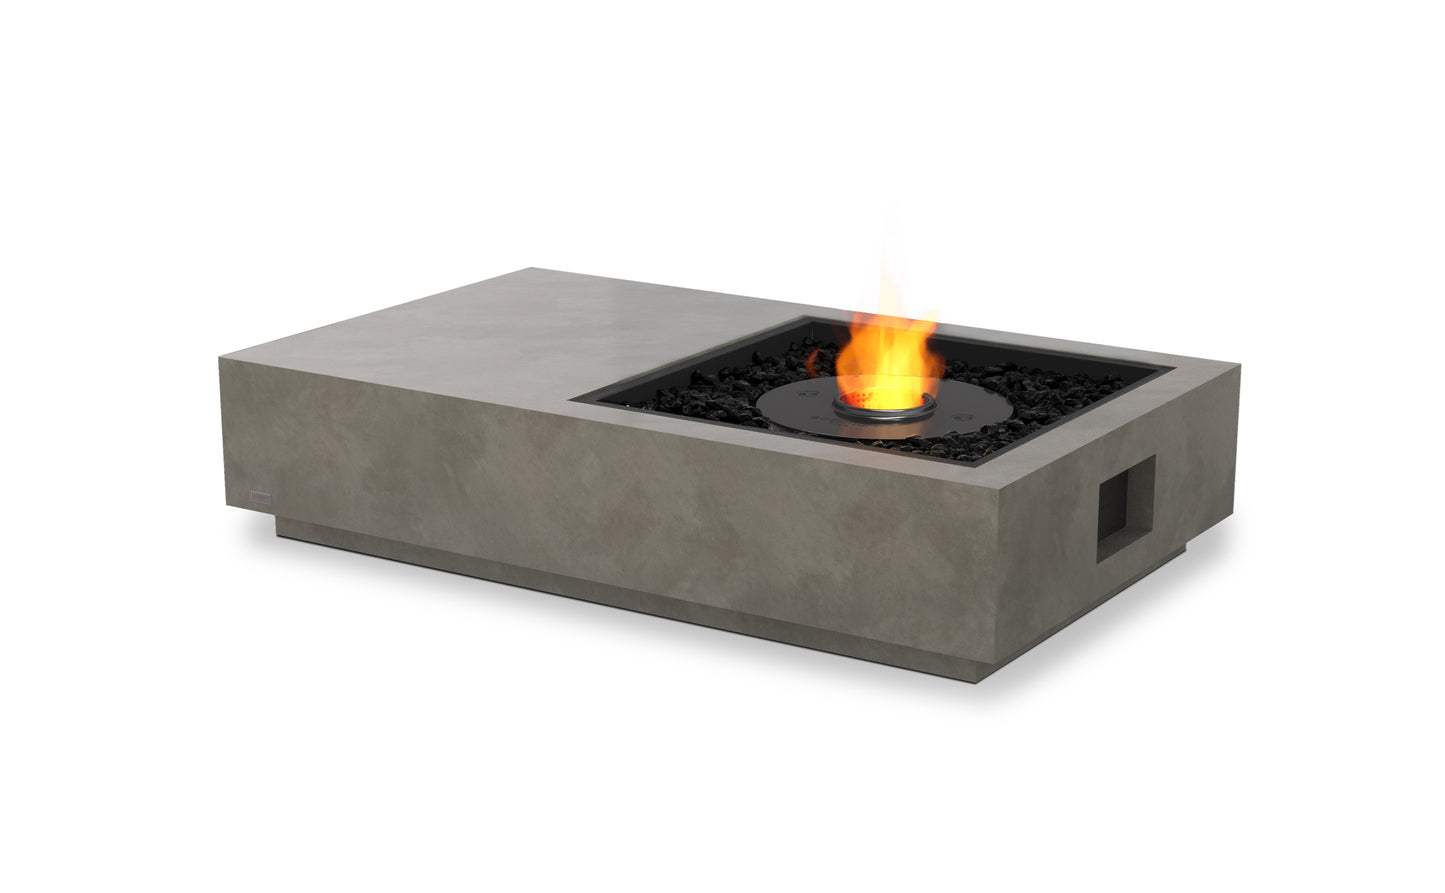 EcoSmart Fire Manhattan 50 Fire Pit Table with Bioethanol Sustainable Fuel - PadioLiving - EcoSmart Fire Manhattan 50 Fire Pit Table with Bioethanol Sustainable Fuel - Fire Pit - PadioLiving